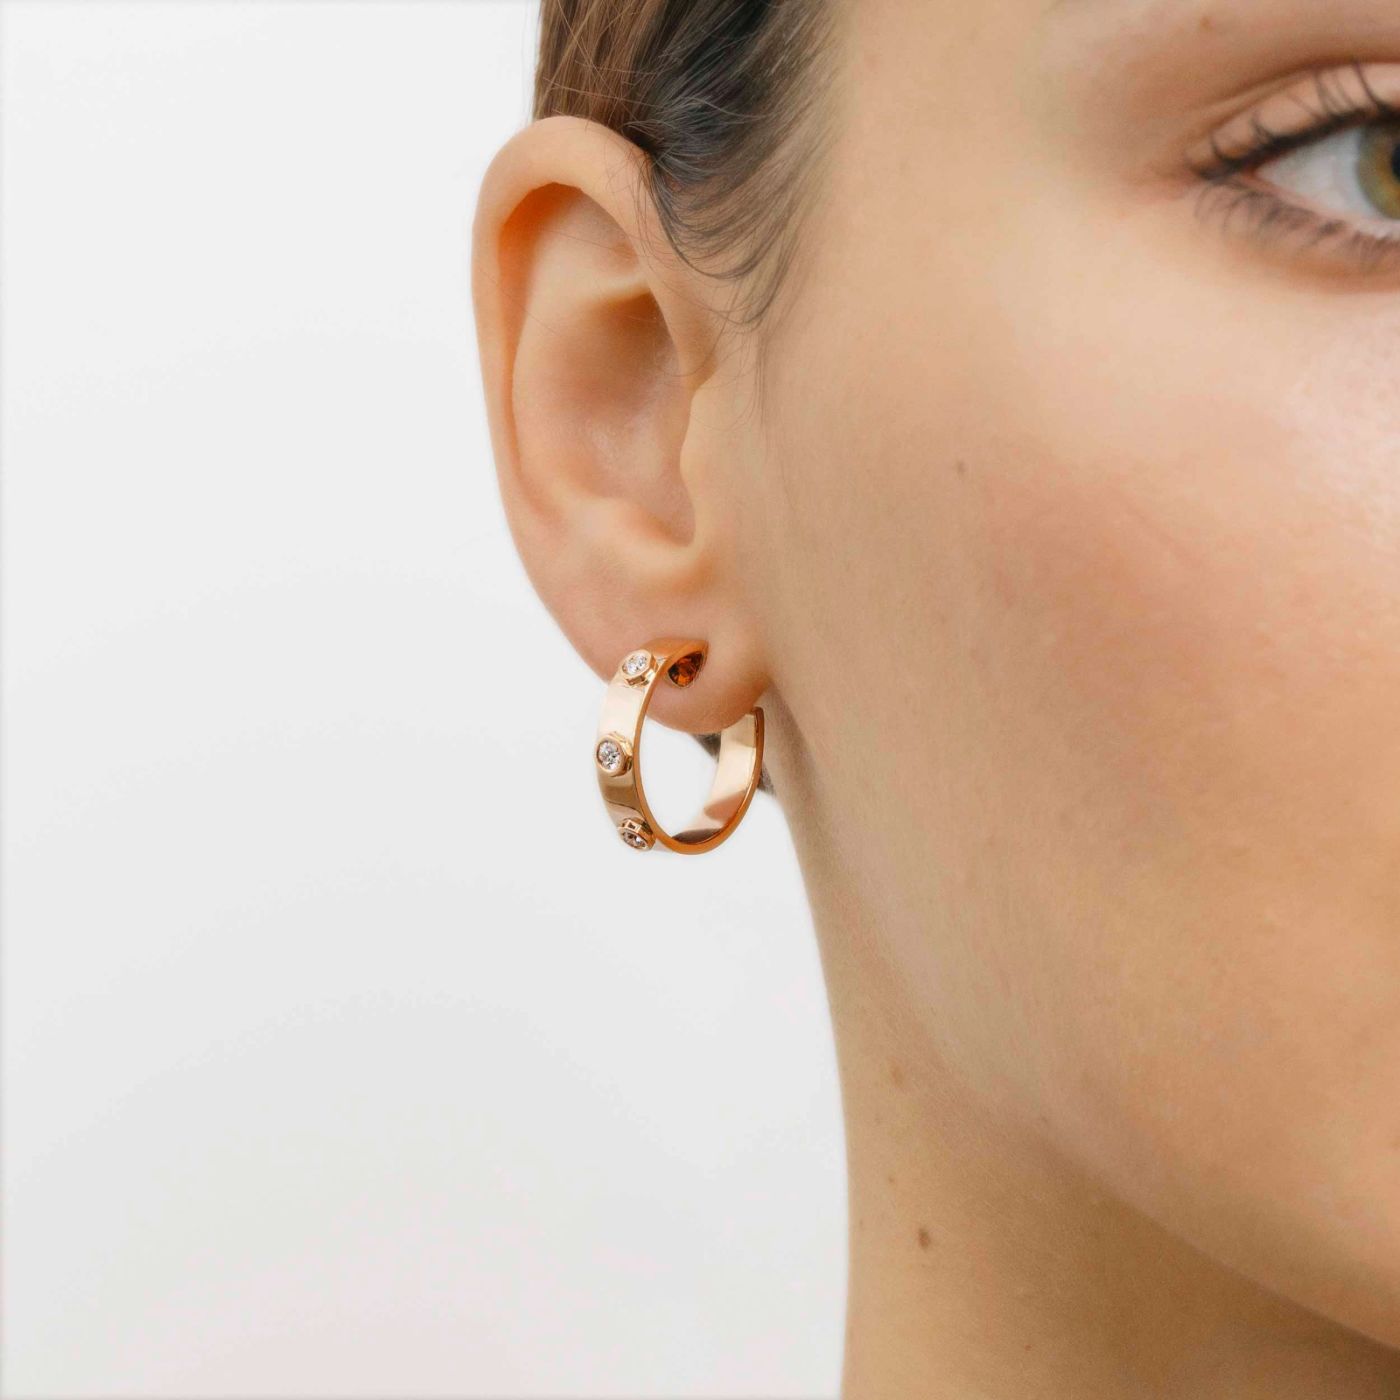 Rose gold earrings with three diamonds